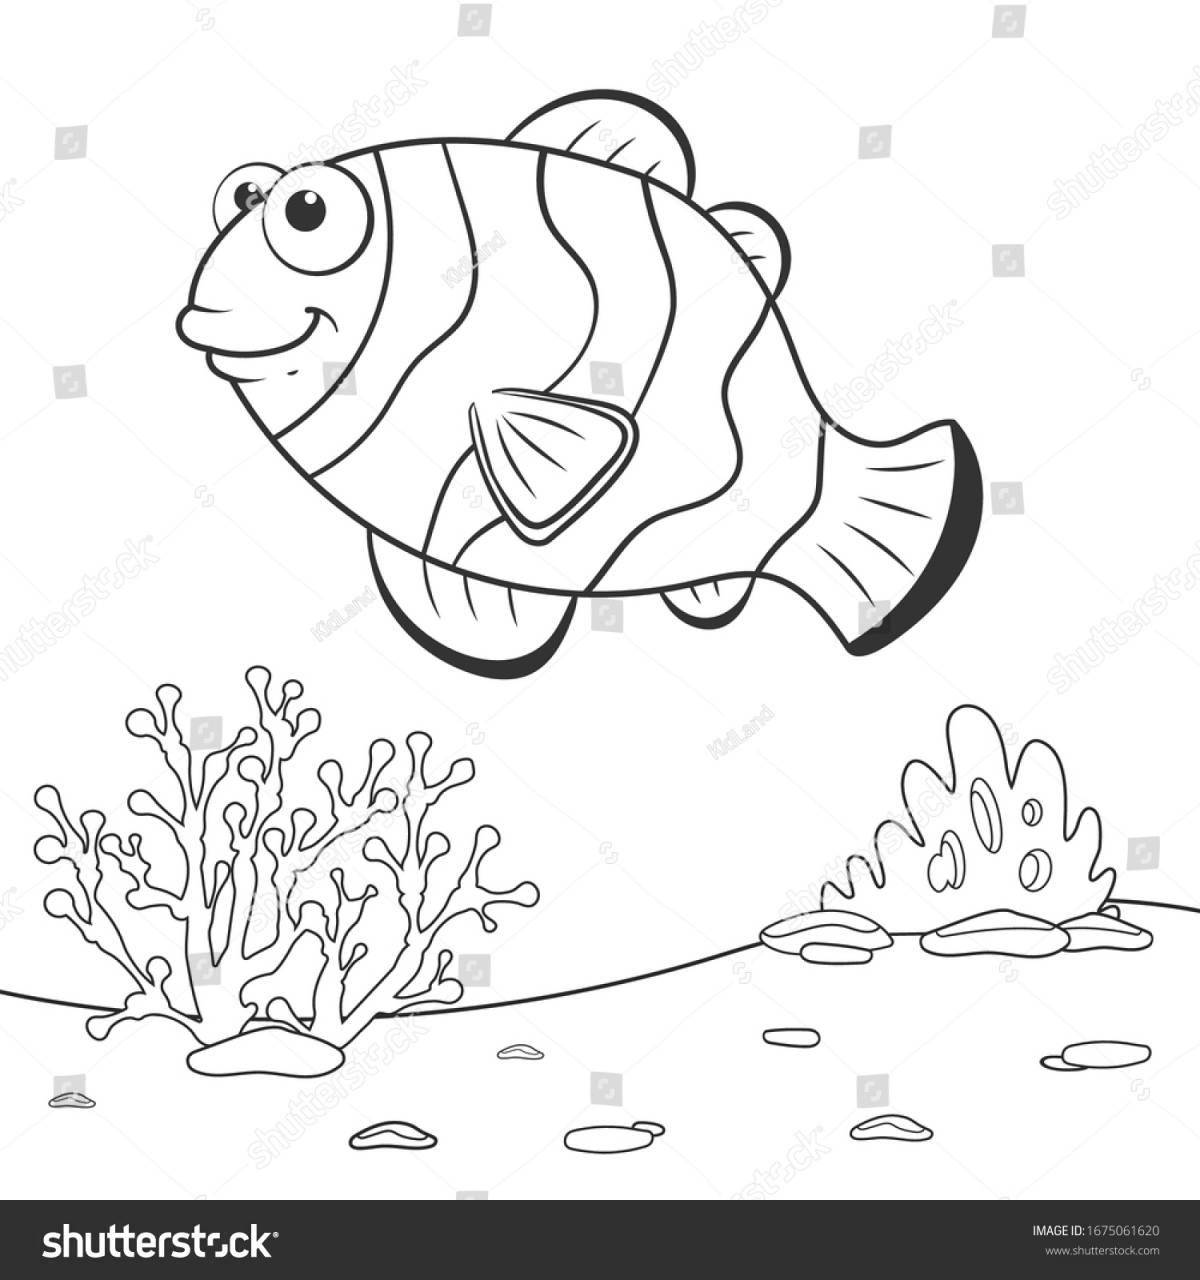 Animated clownfish coloring page for kids